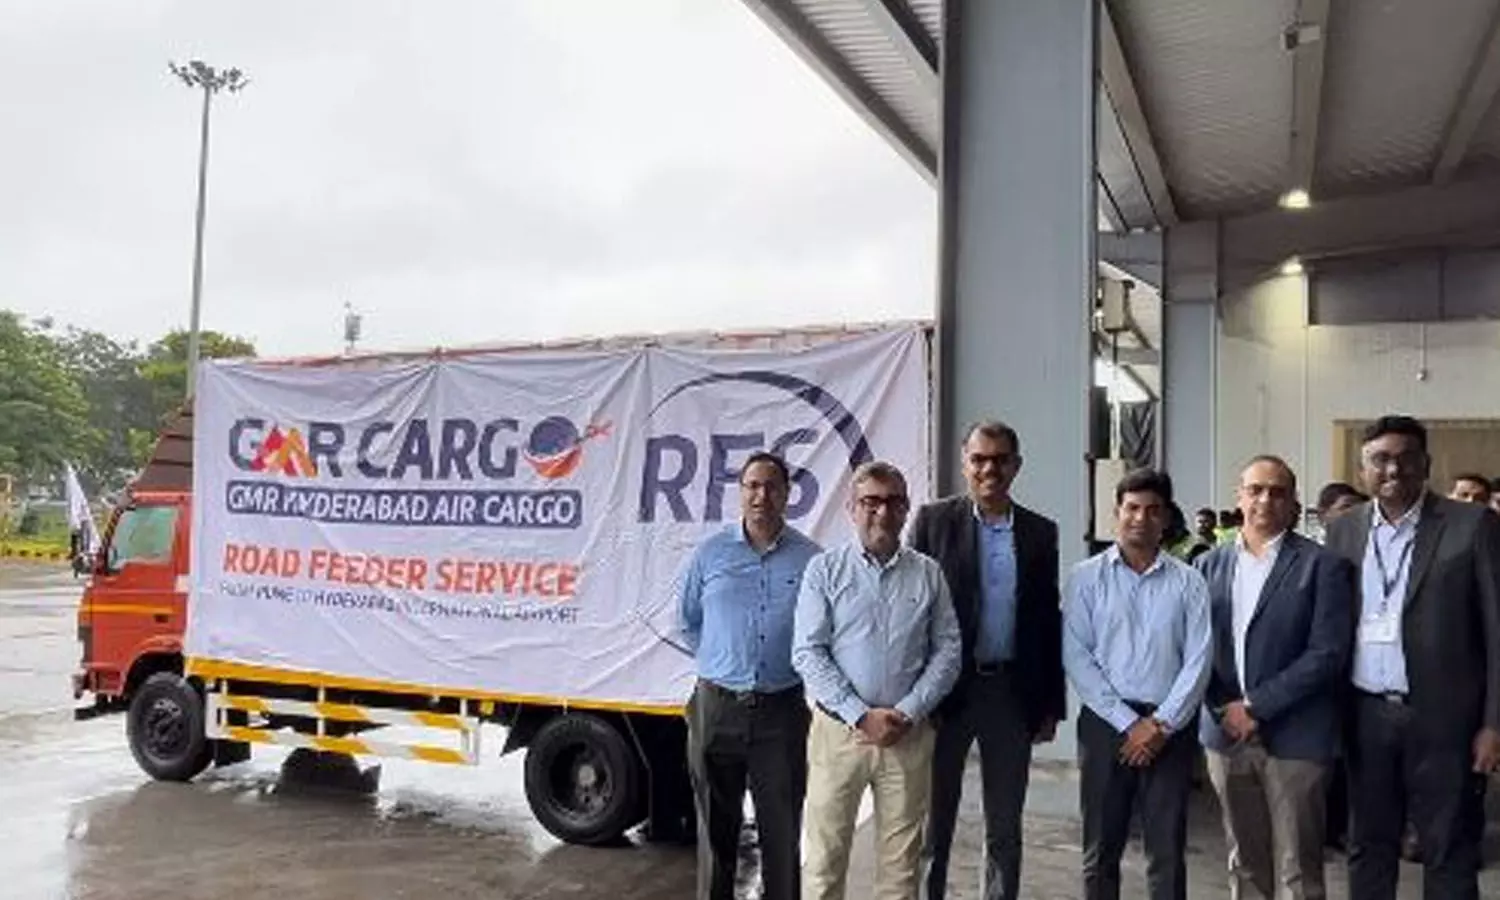 GMR Hyderabad Air Cargo introduces Pune-Hyderabad road feeder service for efficient logistic solutions